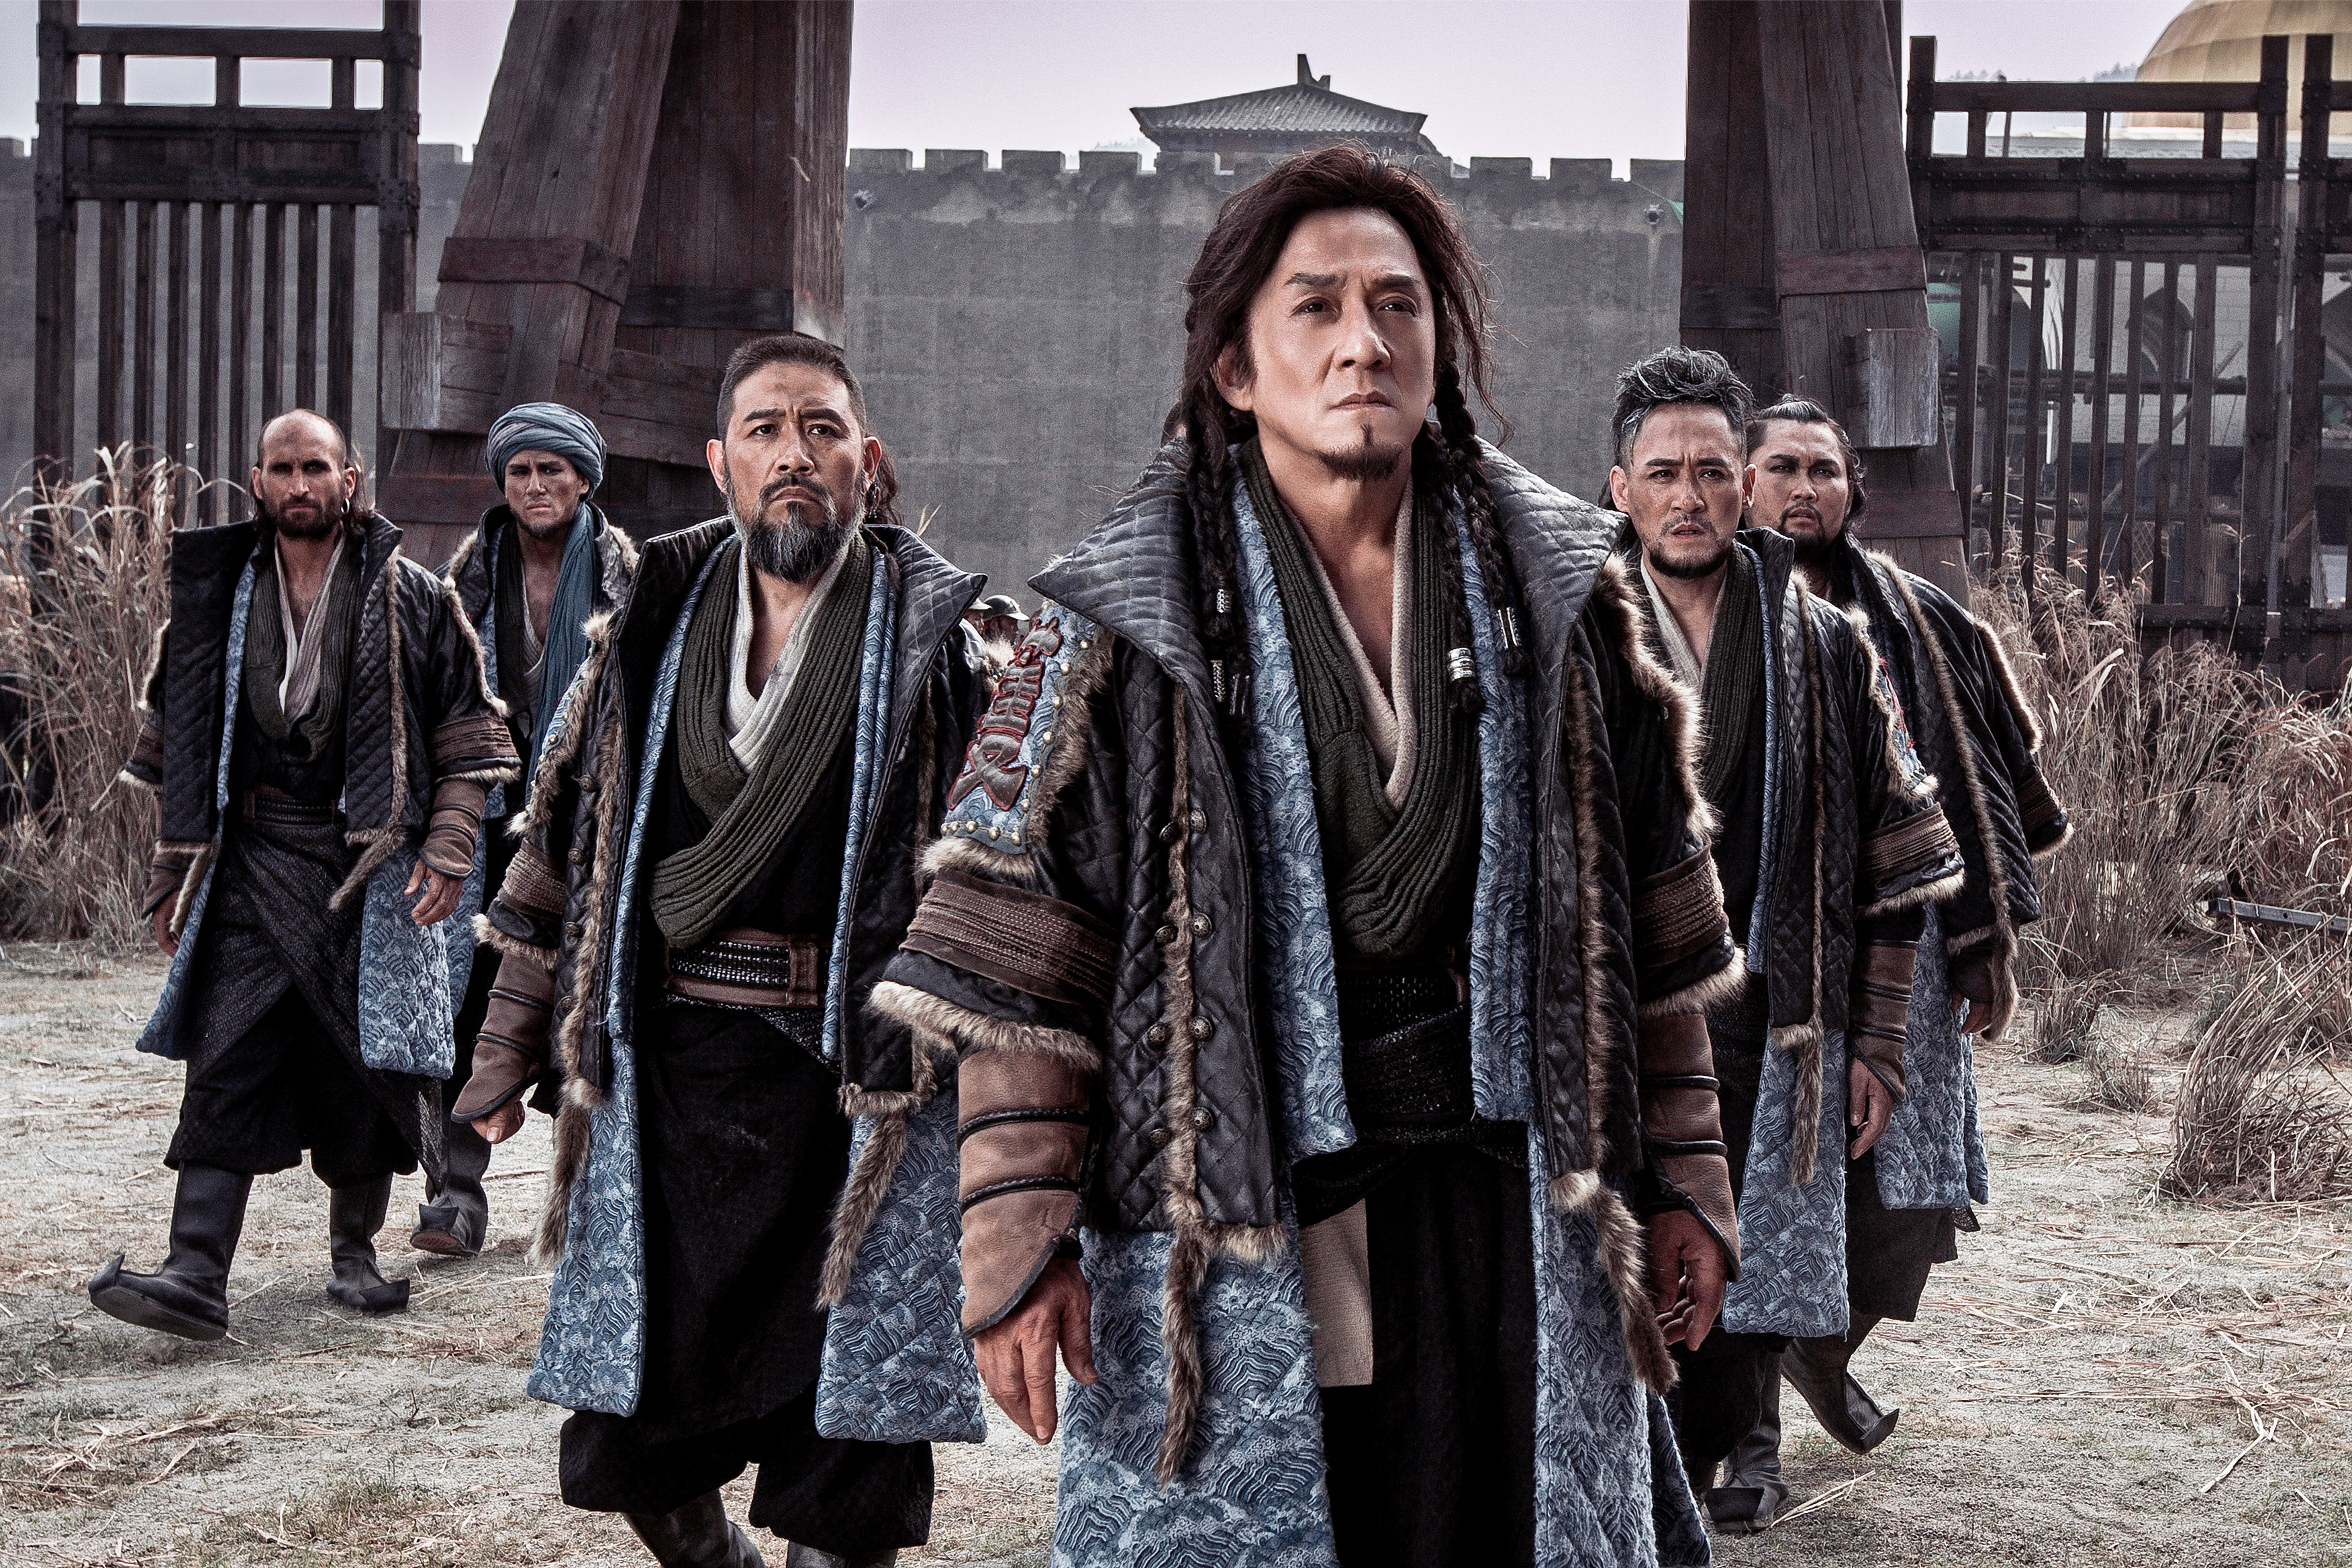 6 Reasons to Watch the New Jackie Chan Movie Dragon Blade - When In Manila